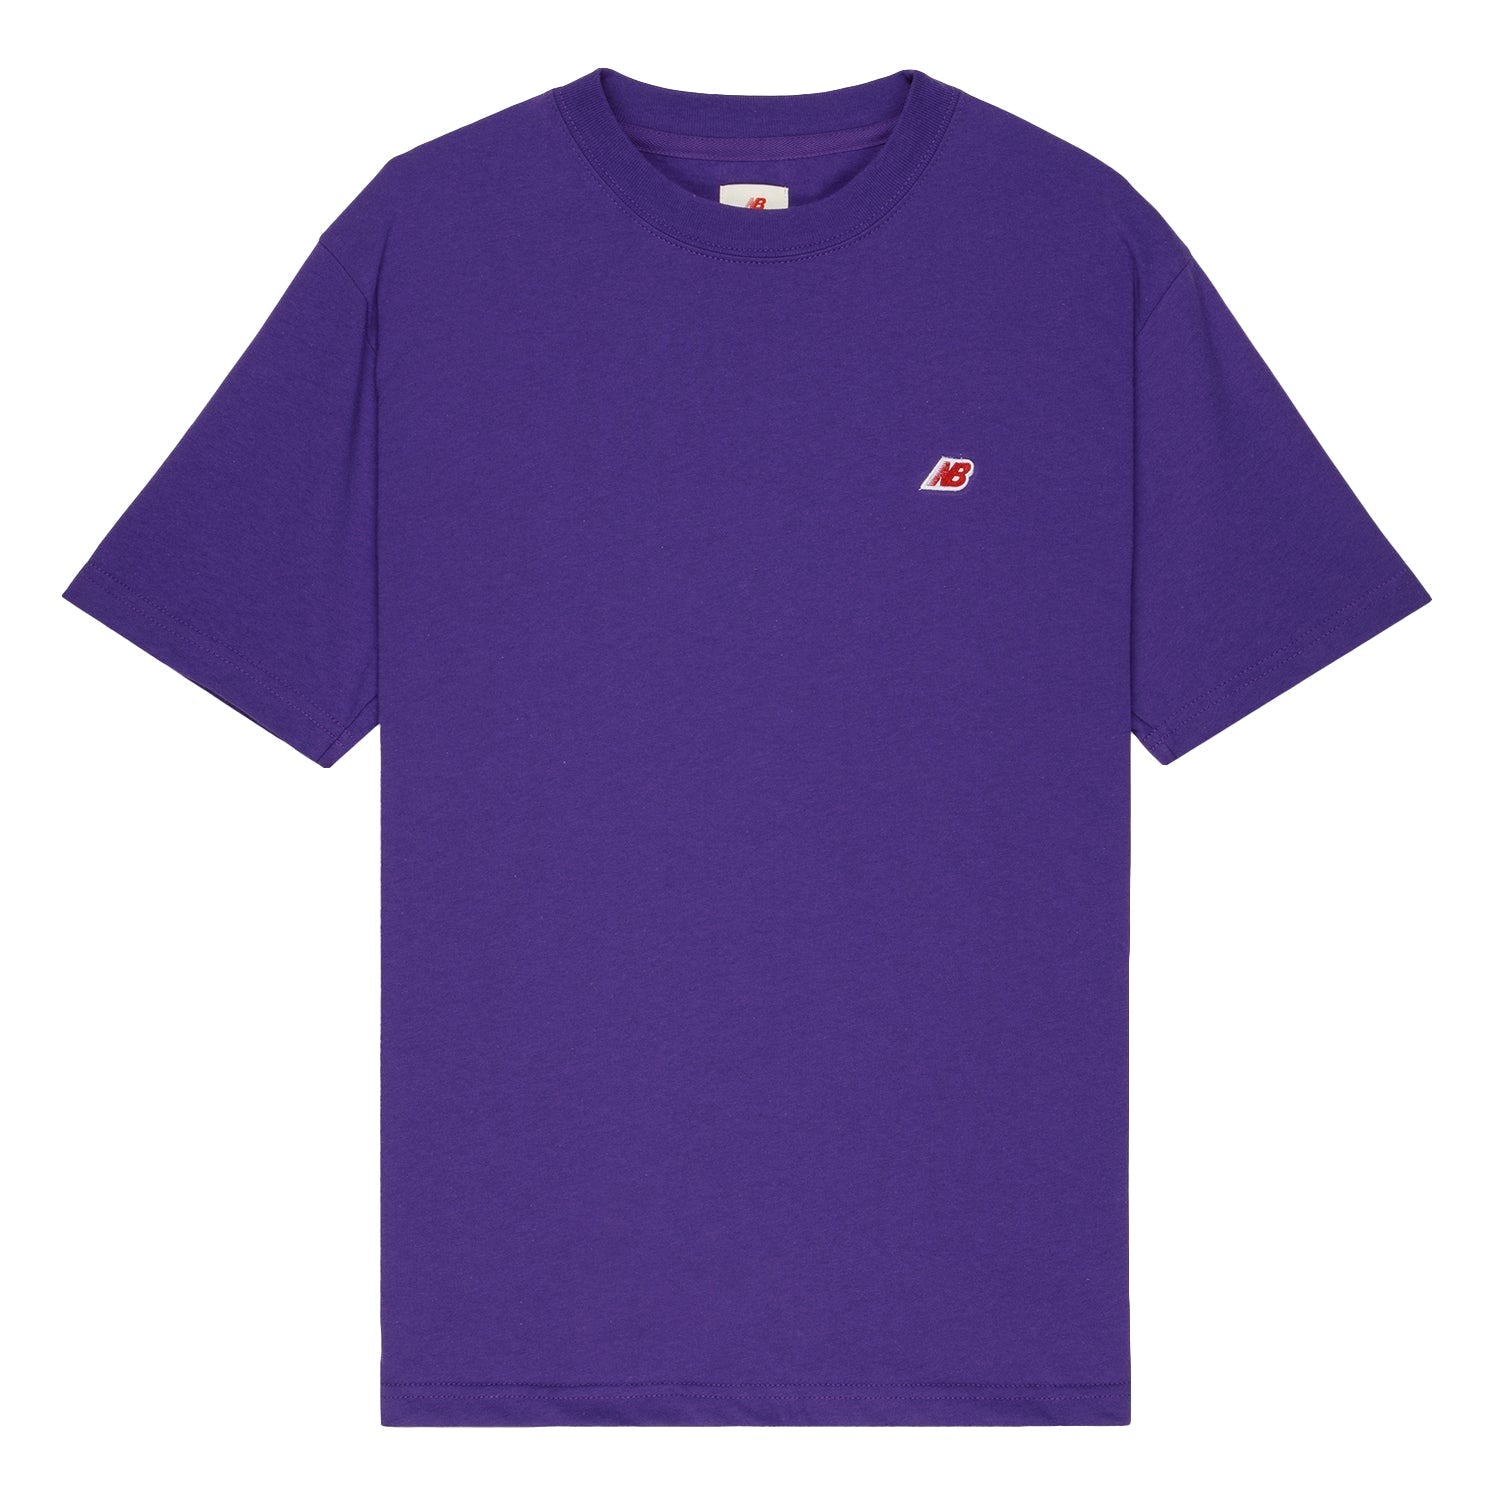 New Balance Men MADE in USA Core T-Shirt Prism Purple MT21543-PRP - T-SHIRTS - Canada